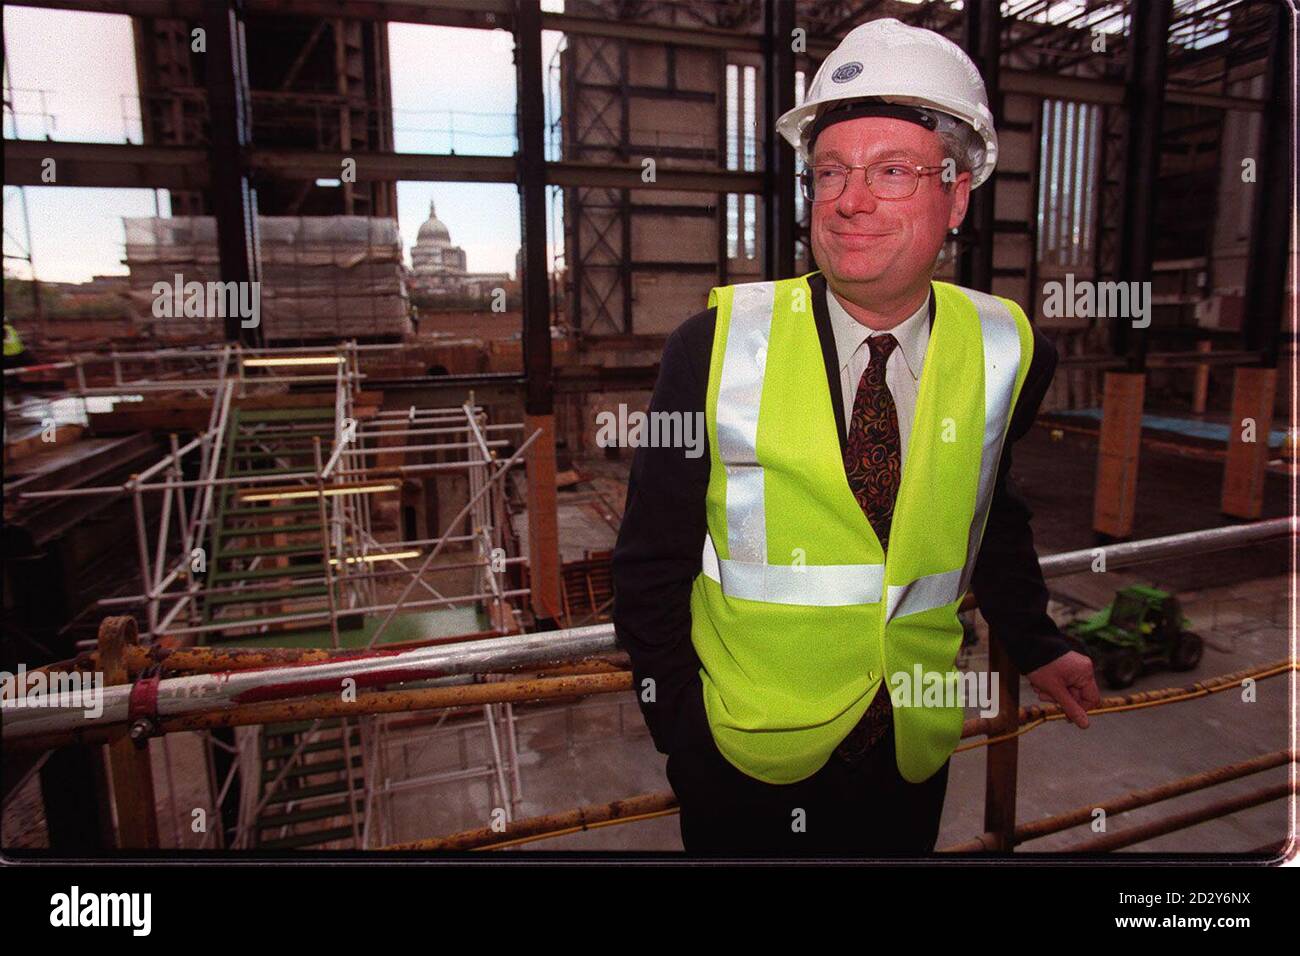 Heritage Secretary, Chris Smith views the construction under way of the new Tate Gallery of Modern Art in London today (Tuesday).  Photo by Fiona Hanson/PA. Stock Photo